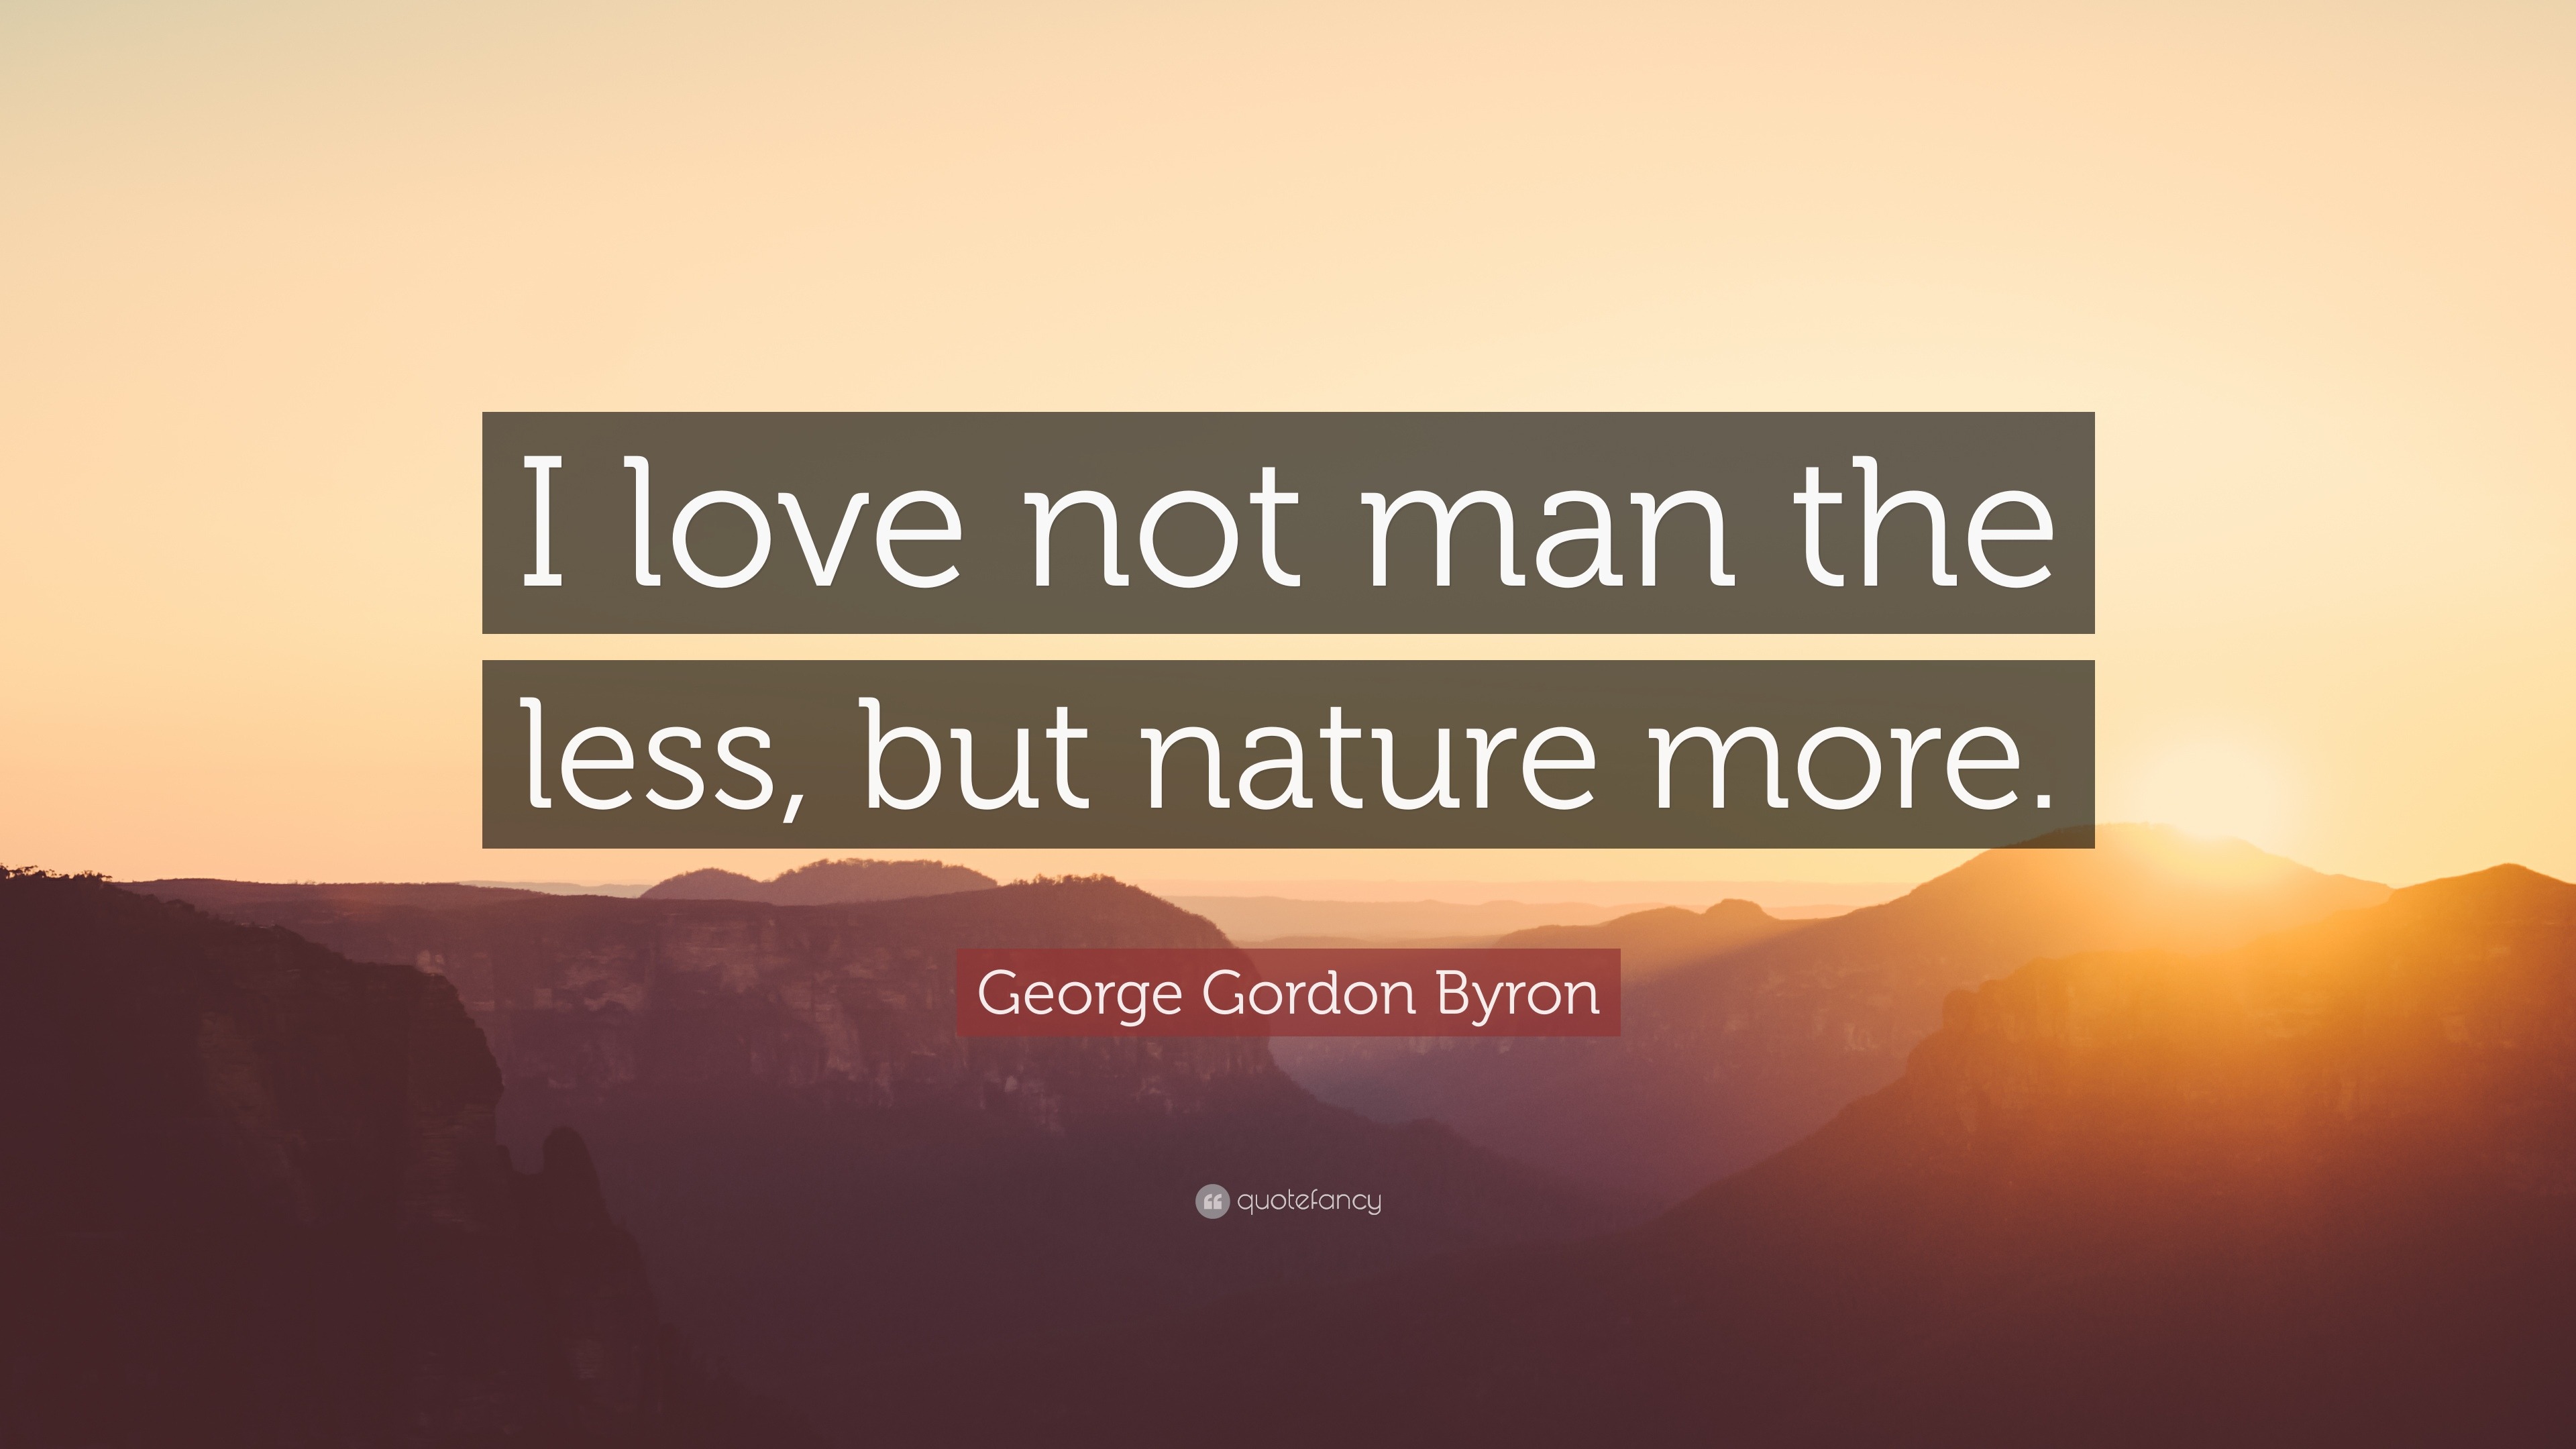 George Gordon Byron Quote “I love not man the less but nature more